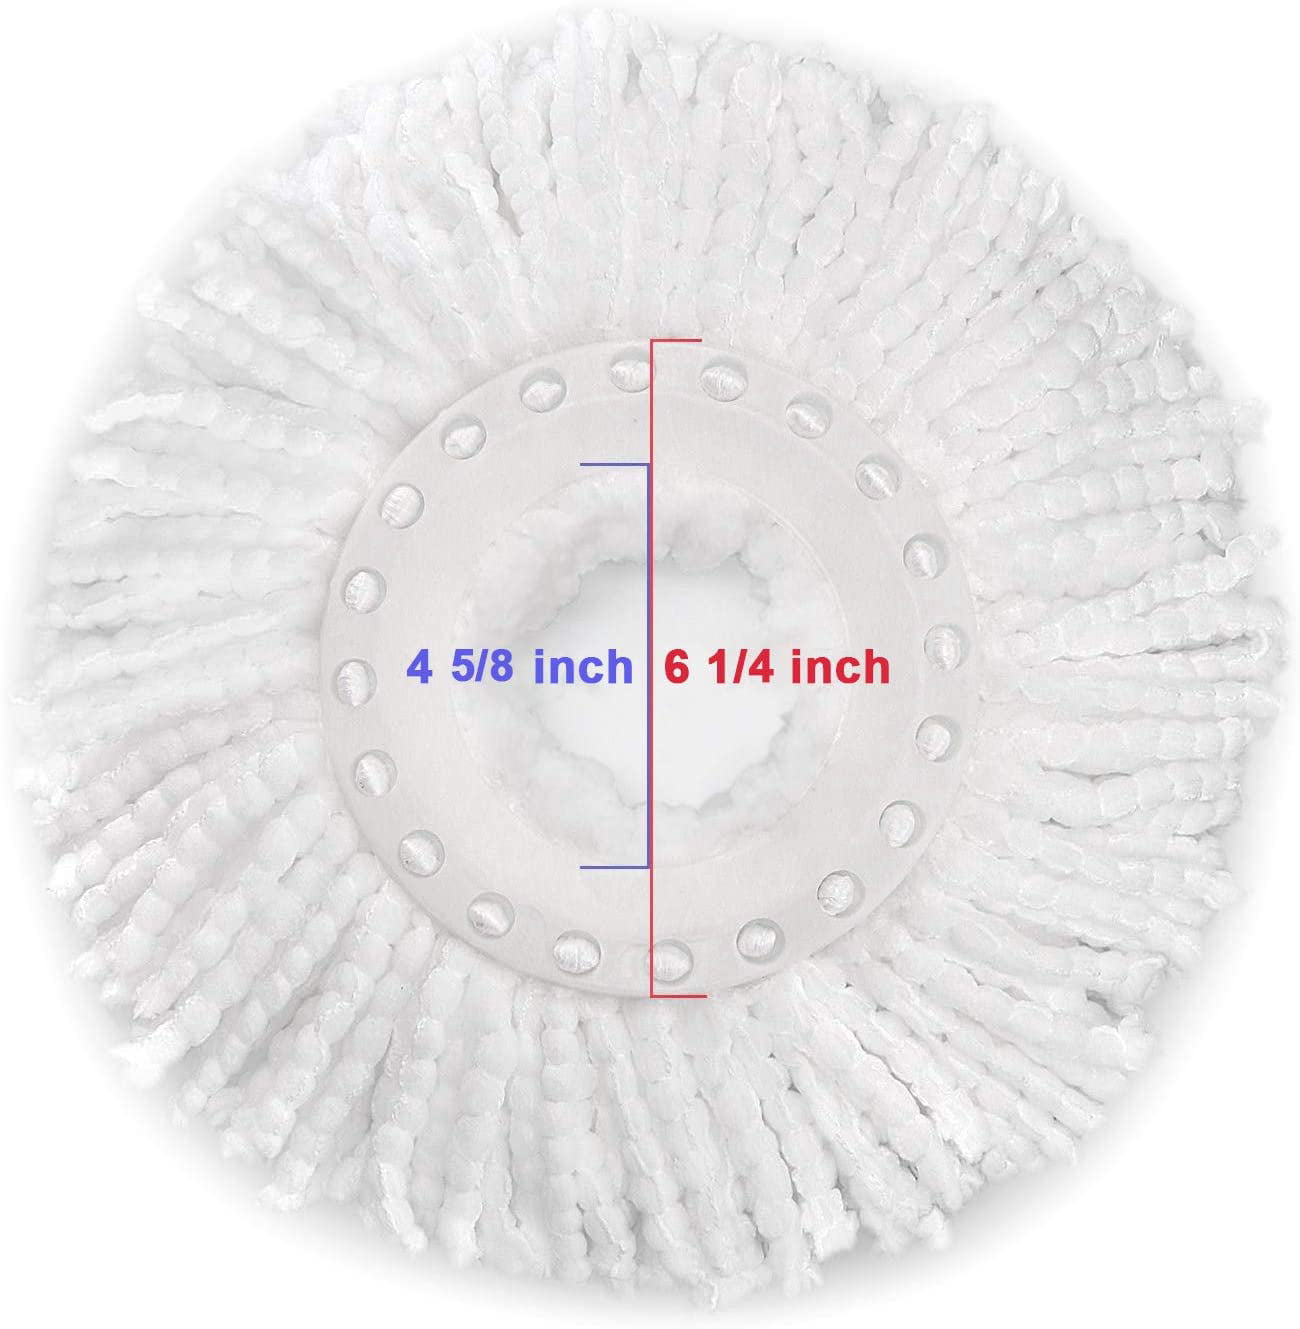 3 Pack Spin Mop Replacement Head for Hurrica, Mopnad, Cassabel and Other 360  Spin Mop Systems, Microfiber Spin Mop Refills (3pc-White) 